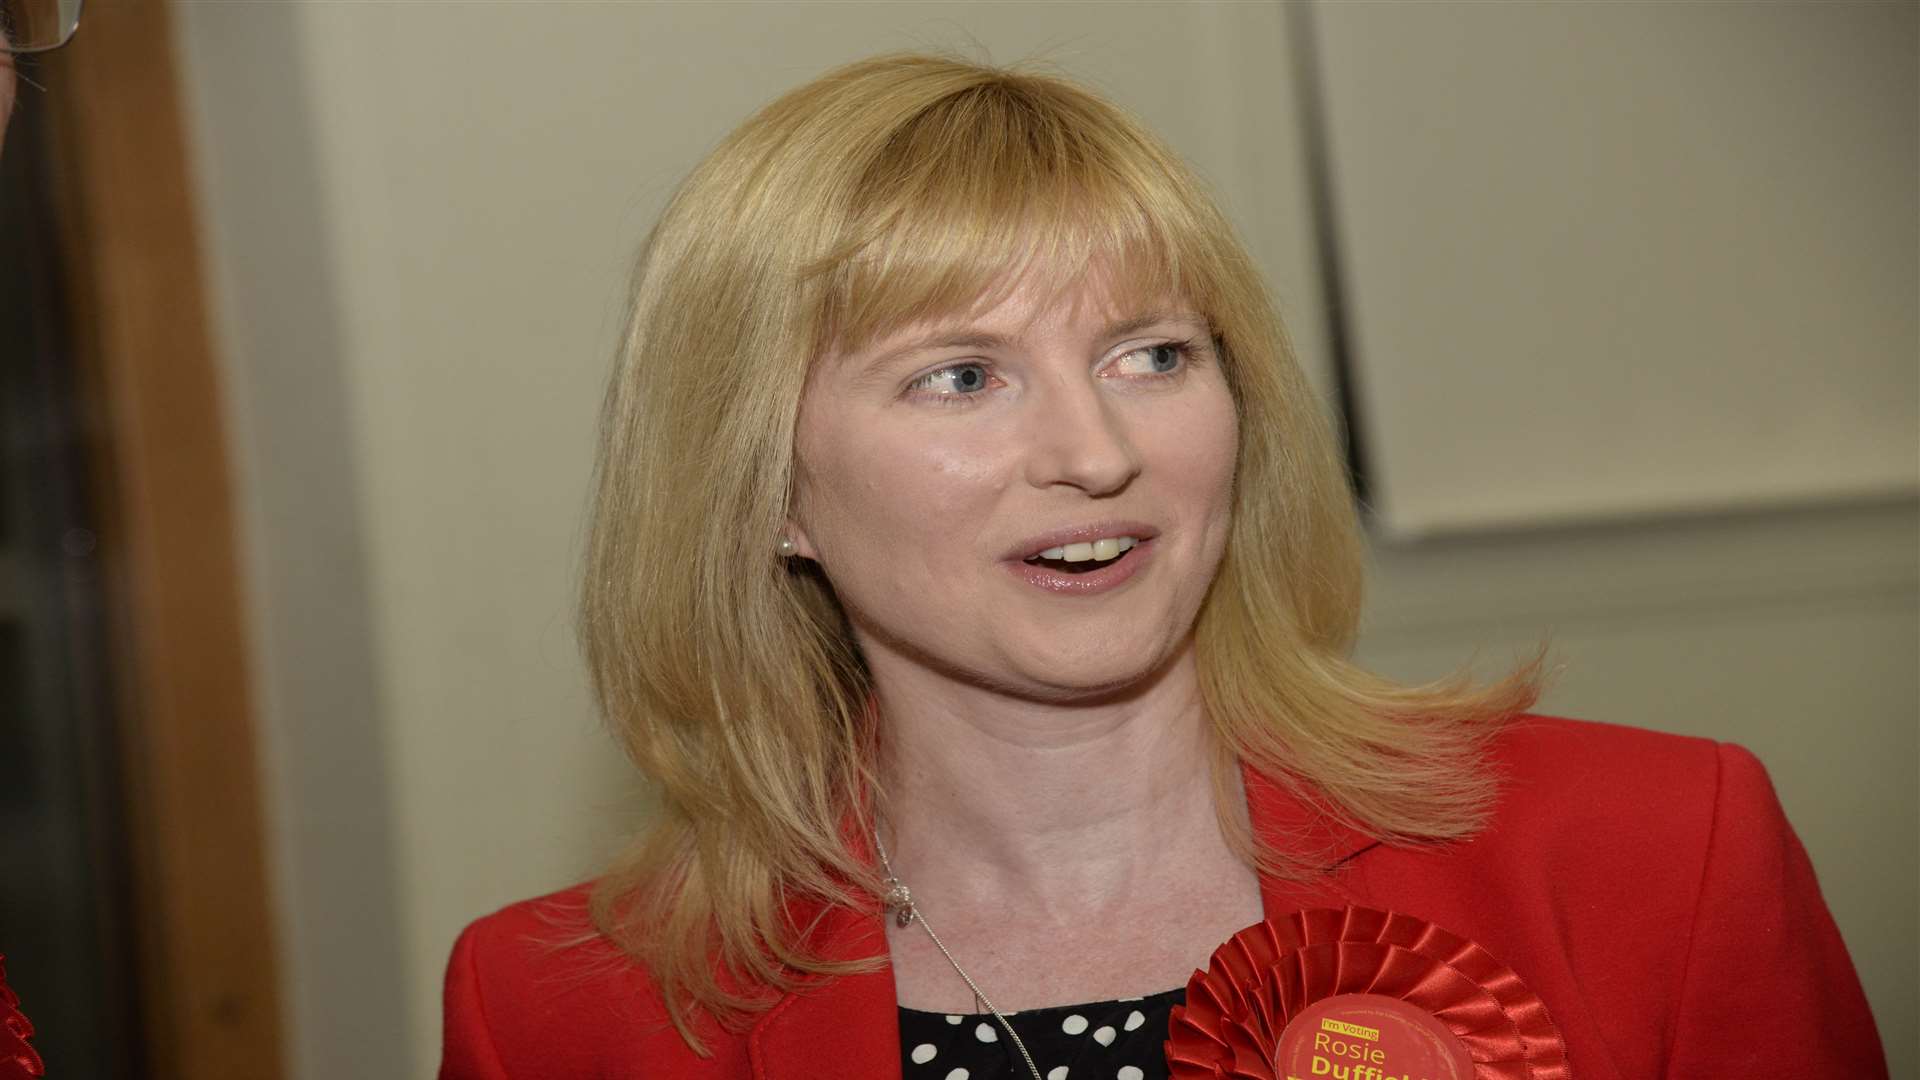 Labour candidate Rosie Duffield. Picture: Chris Davey